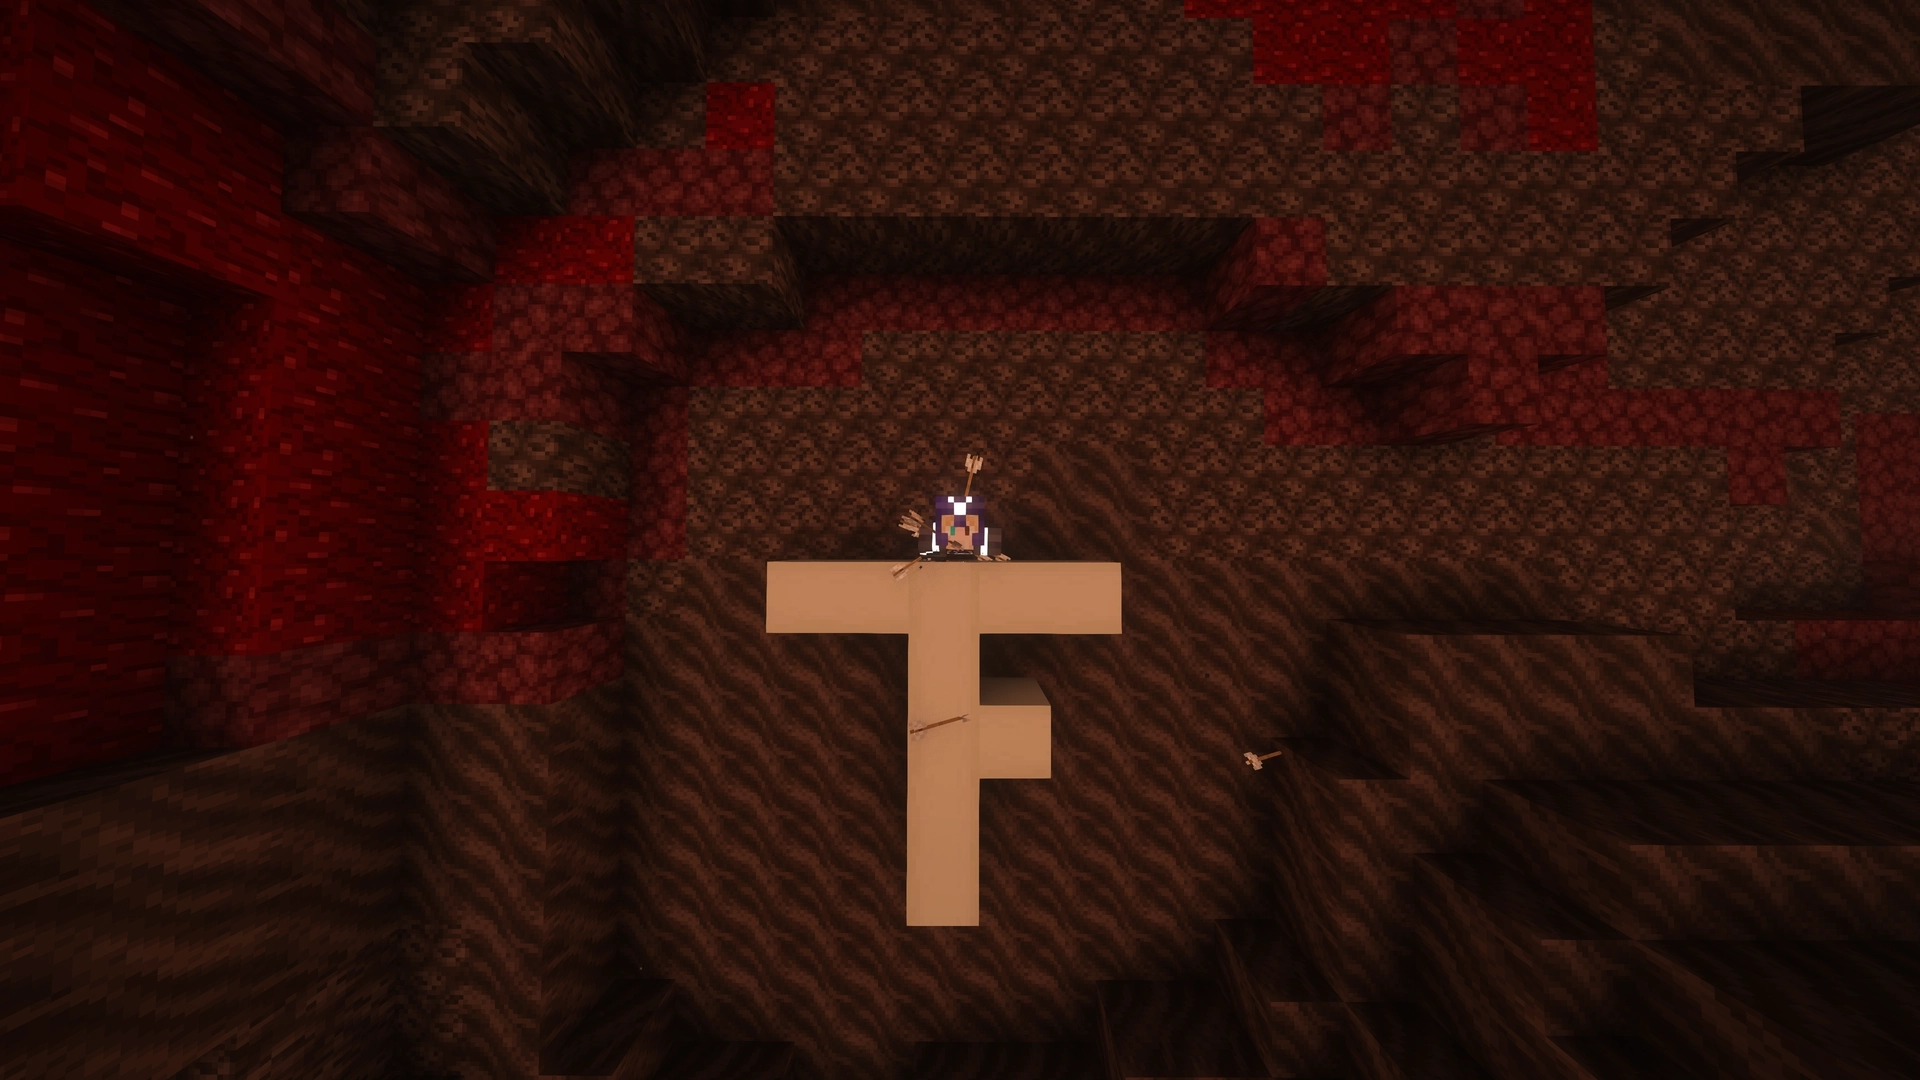 Yet Another FaZe Fossil in a soul sand valley